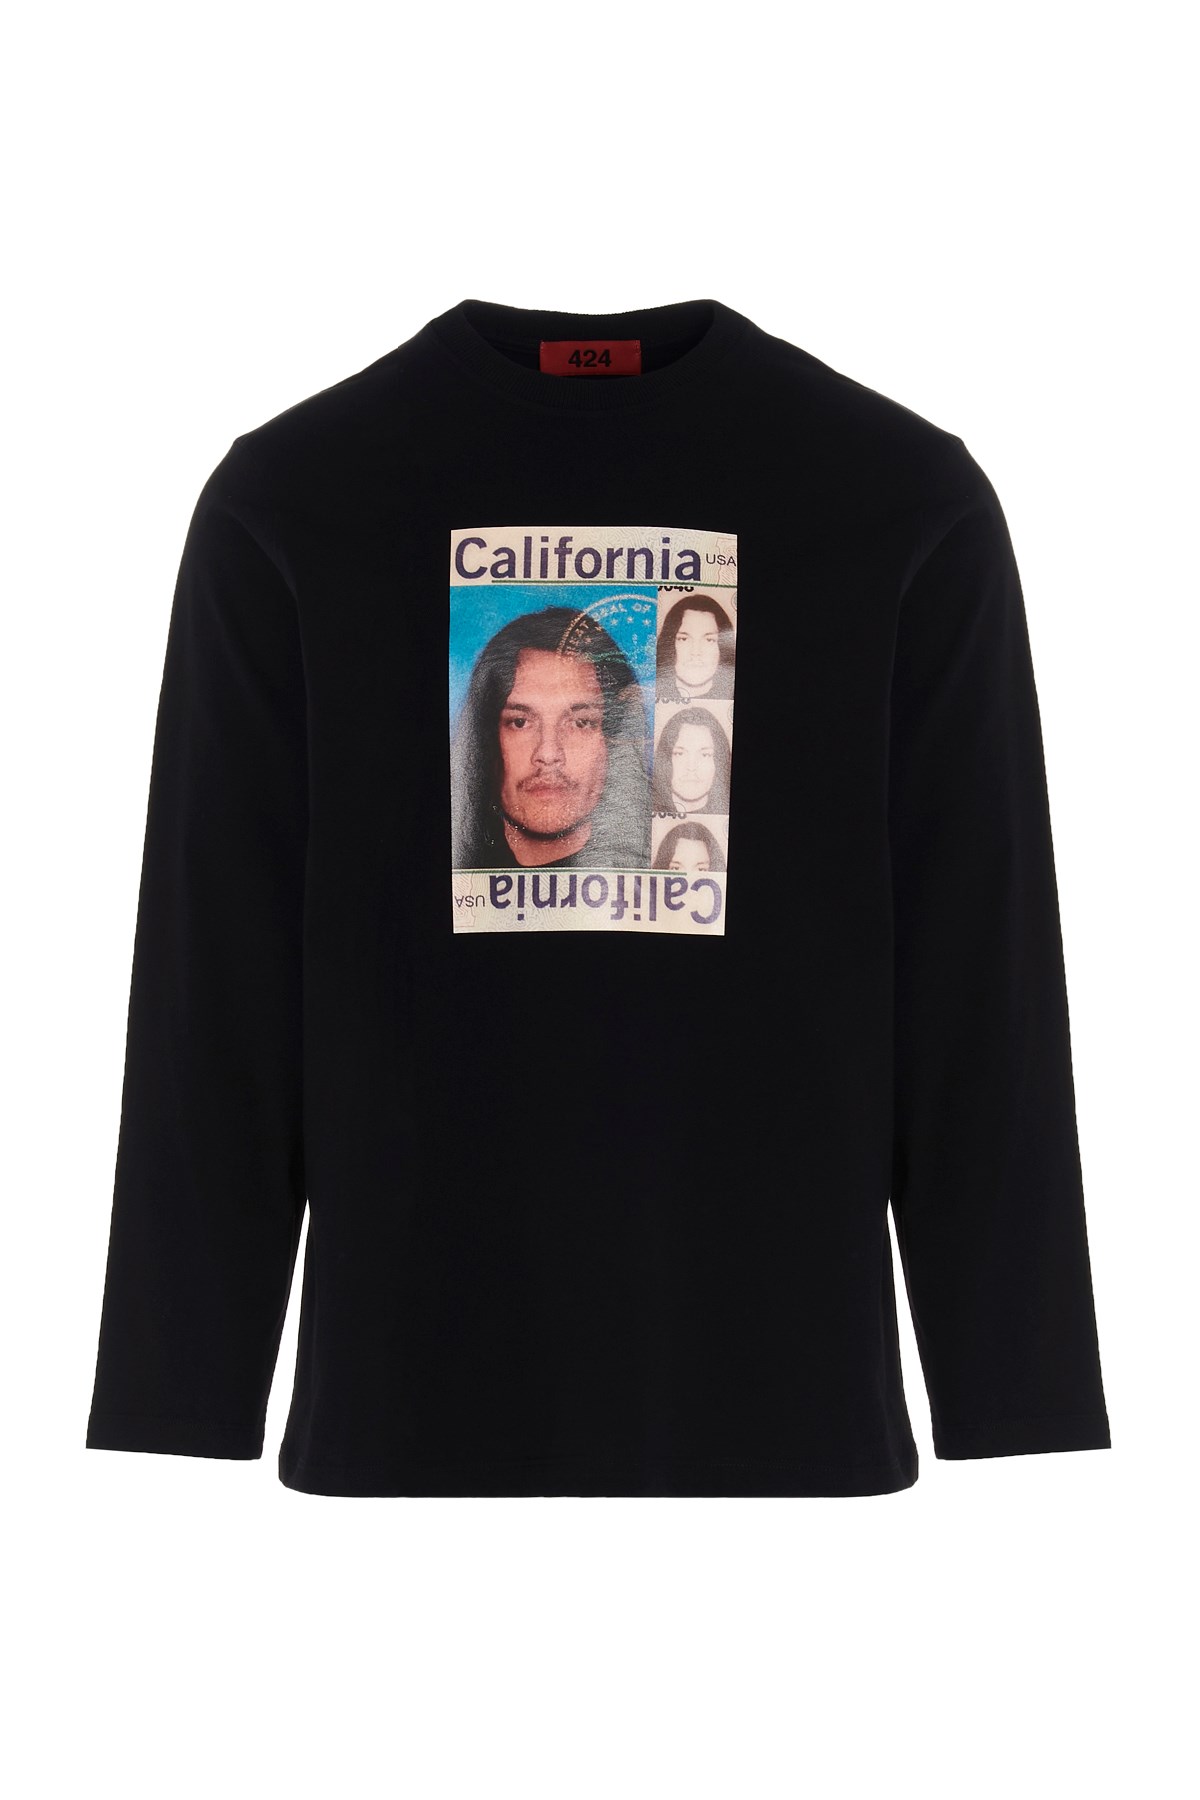 424 Guillermo Drive License' T-Shirt